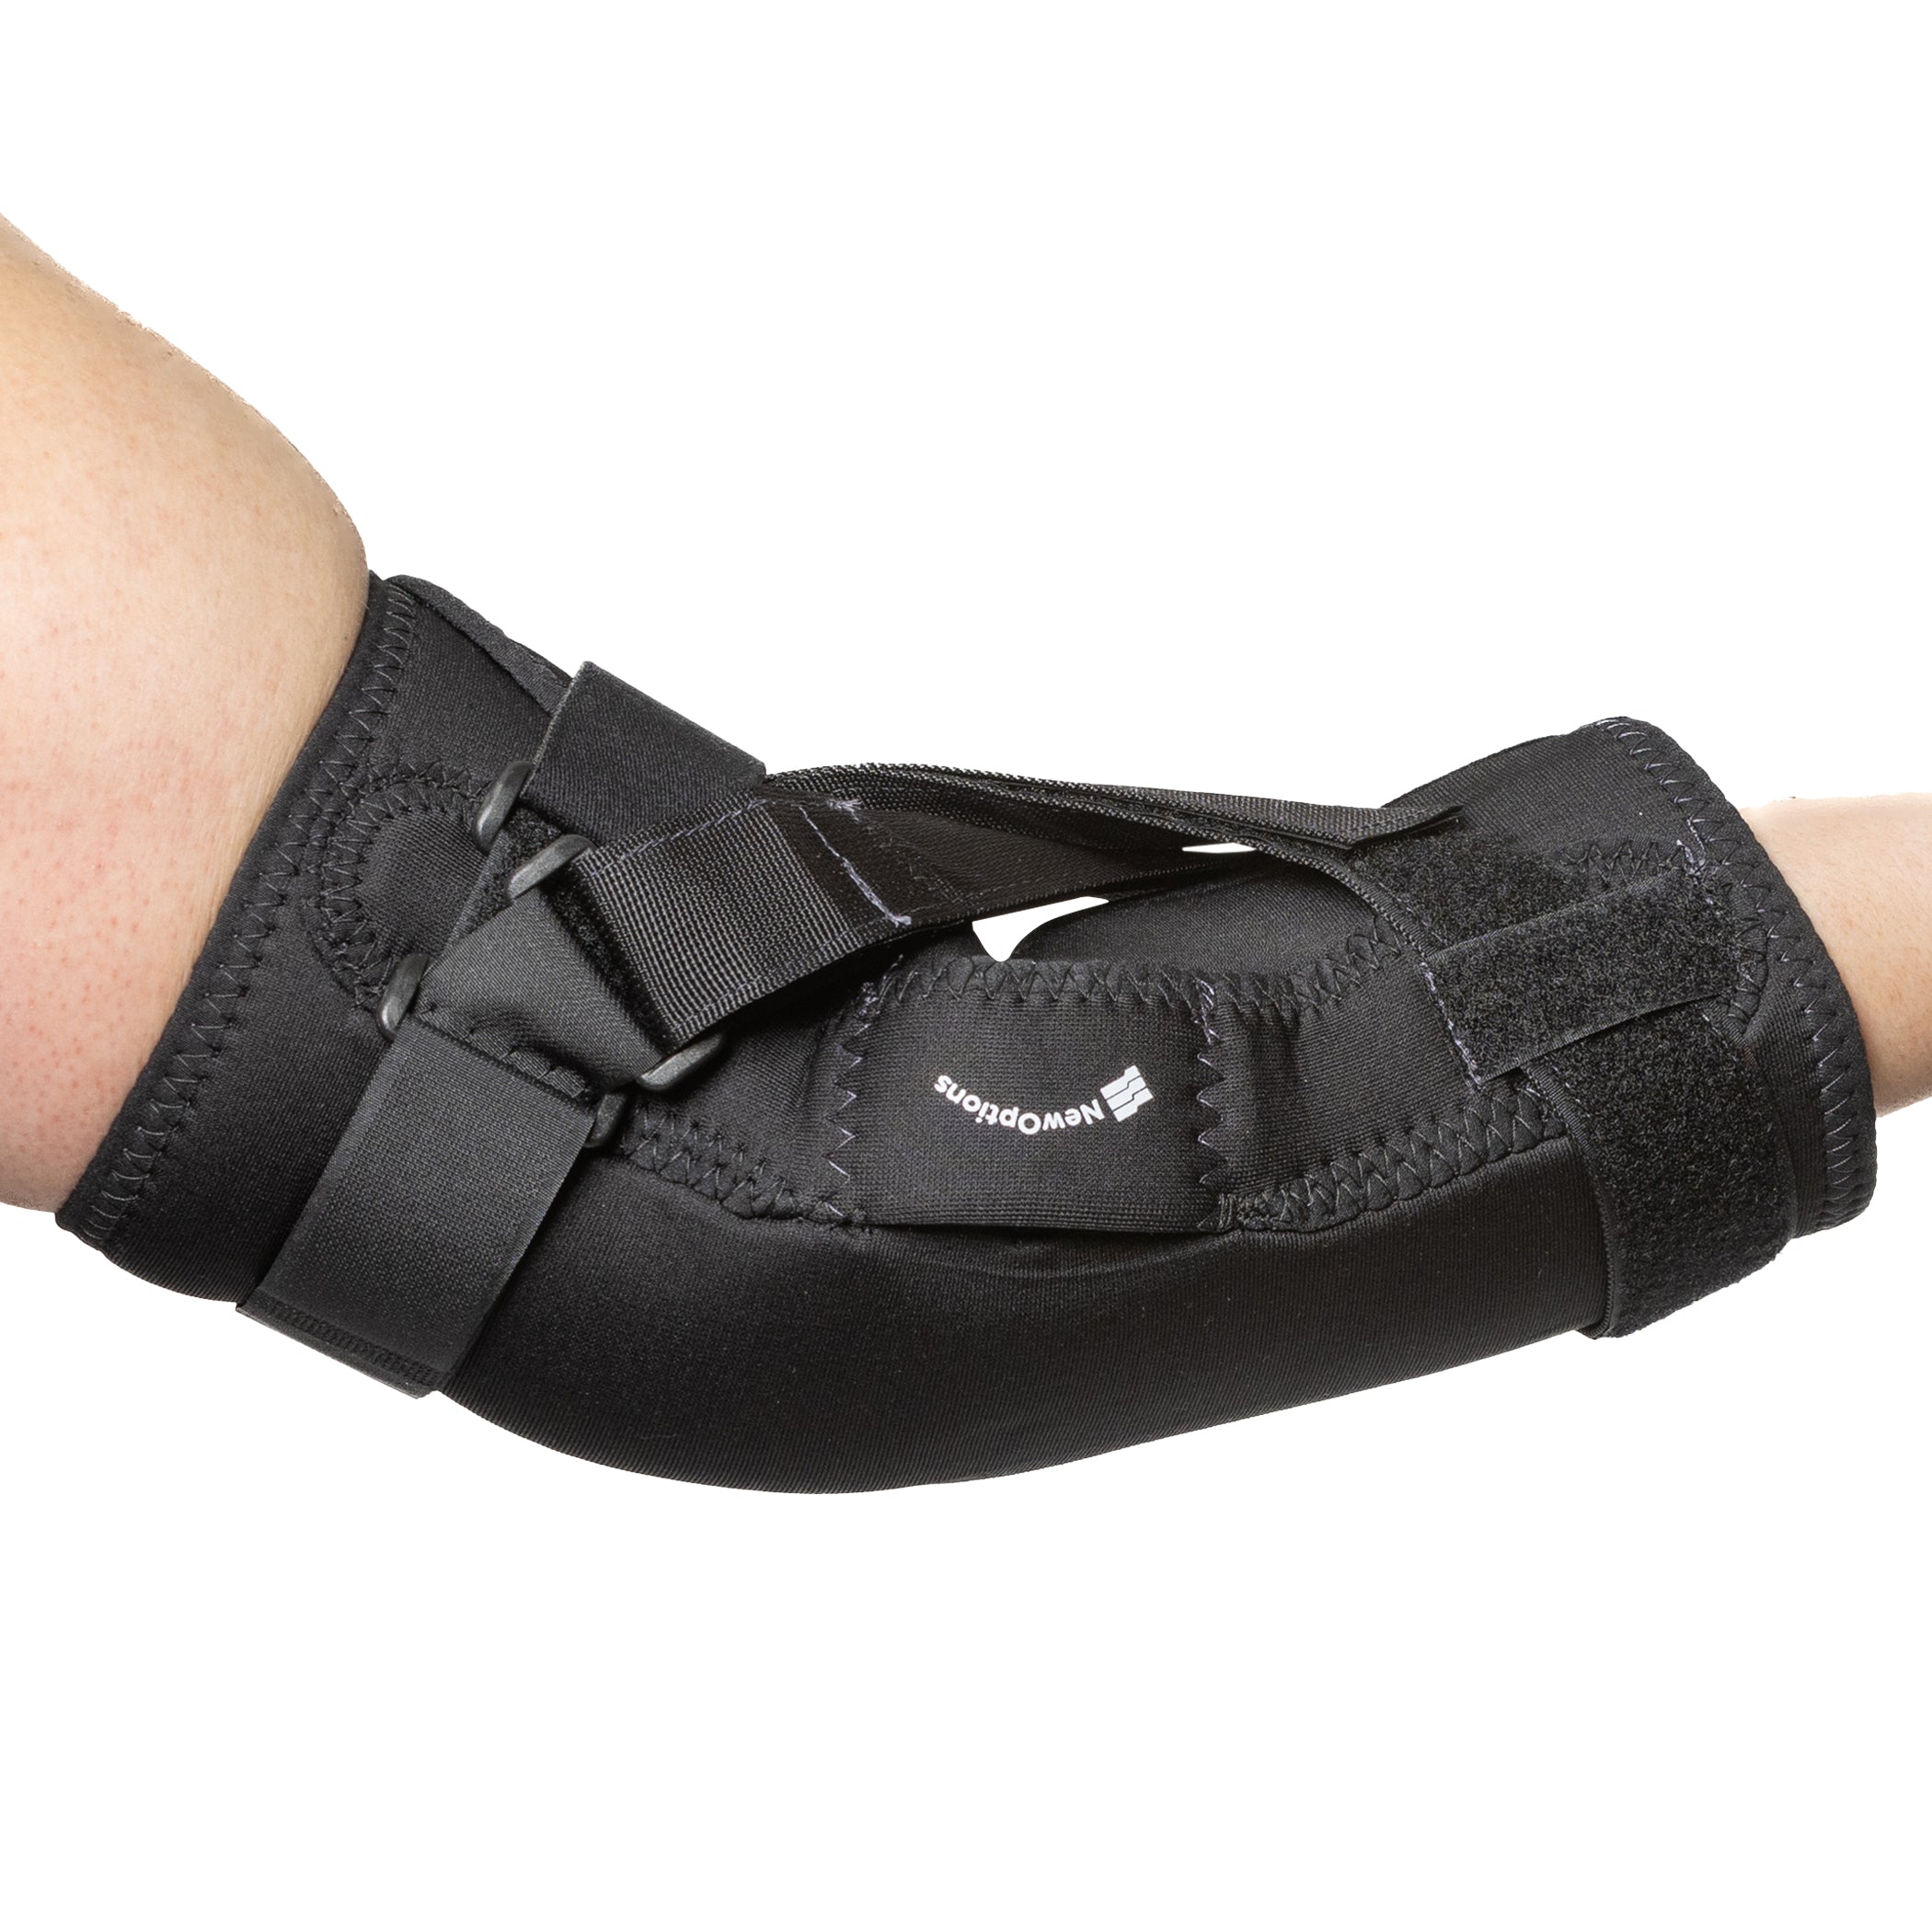 Hyperextension Knee Brace for Recovery & Prevention